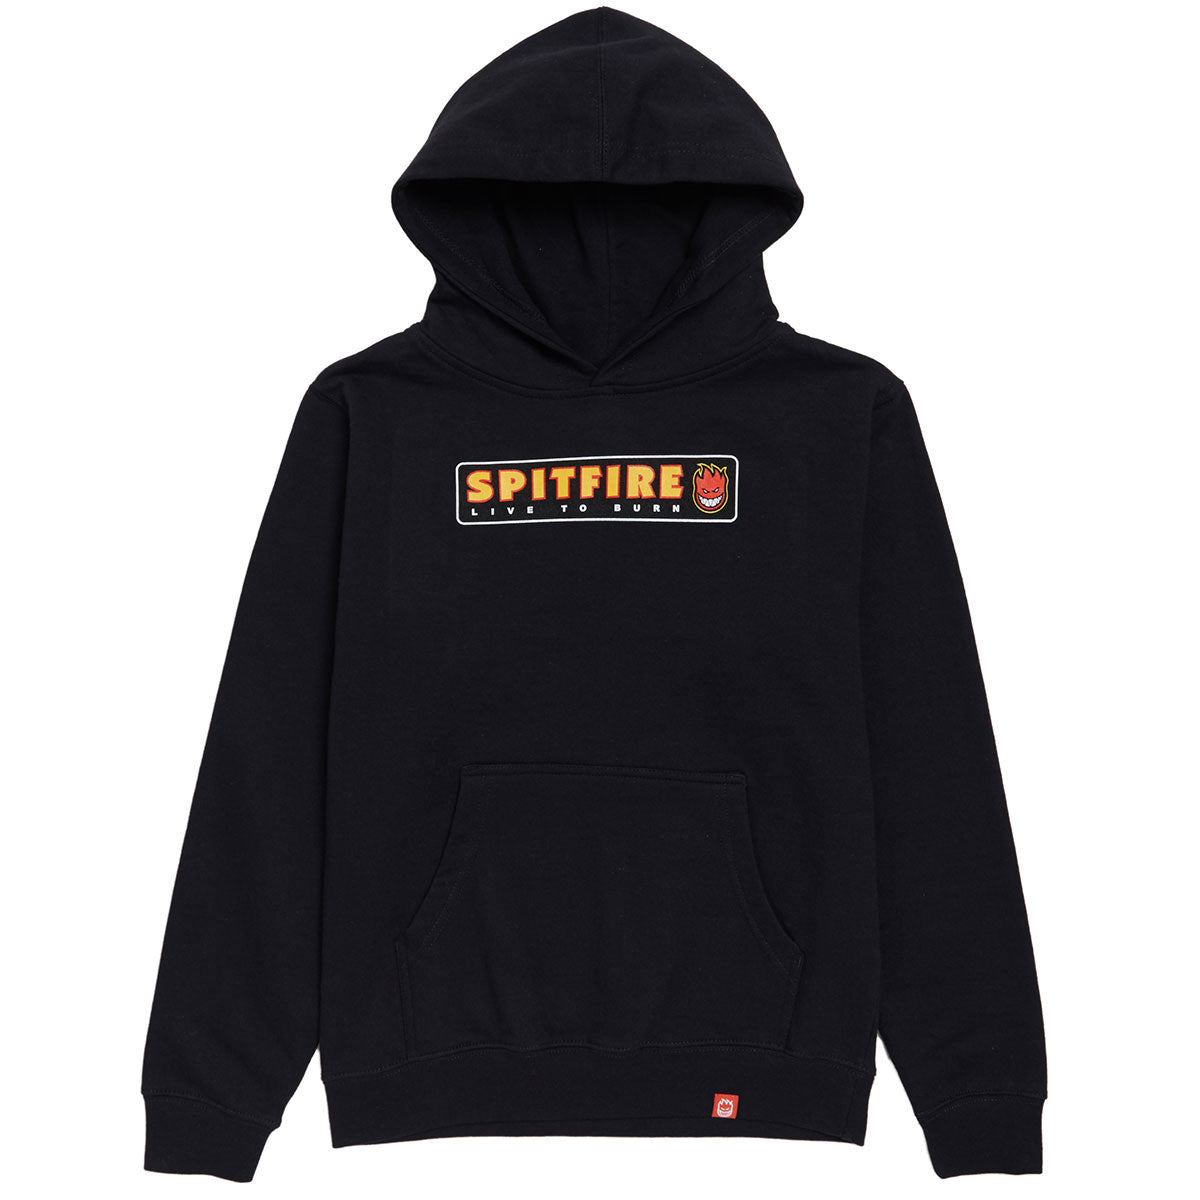 Spitfire Youth Ltb Hoodie - Classic Navy/Multi Color image 1